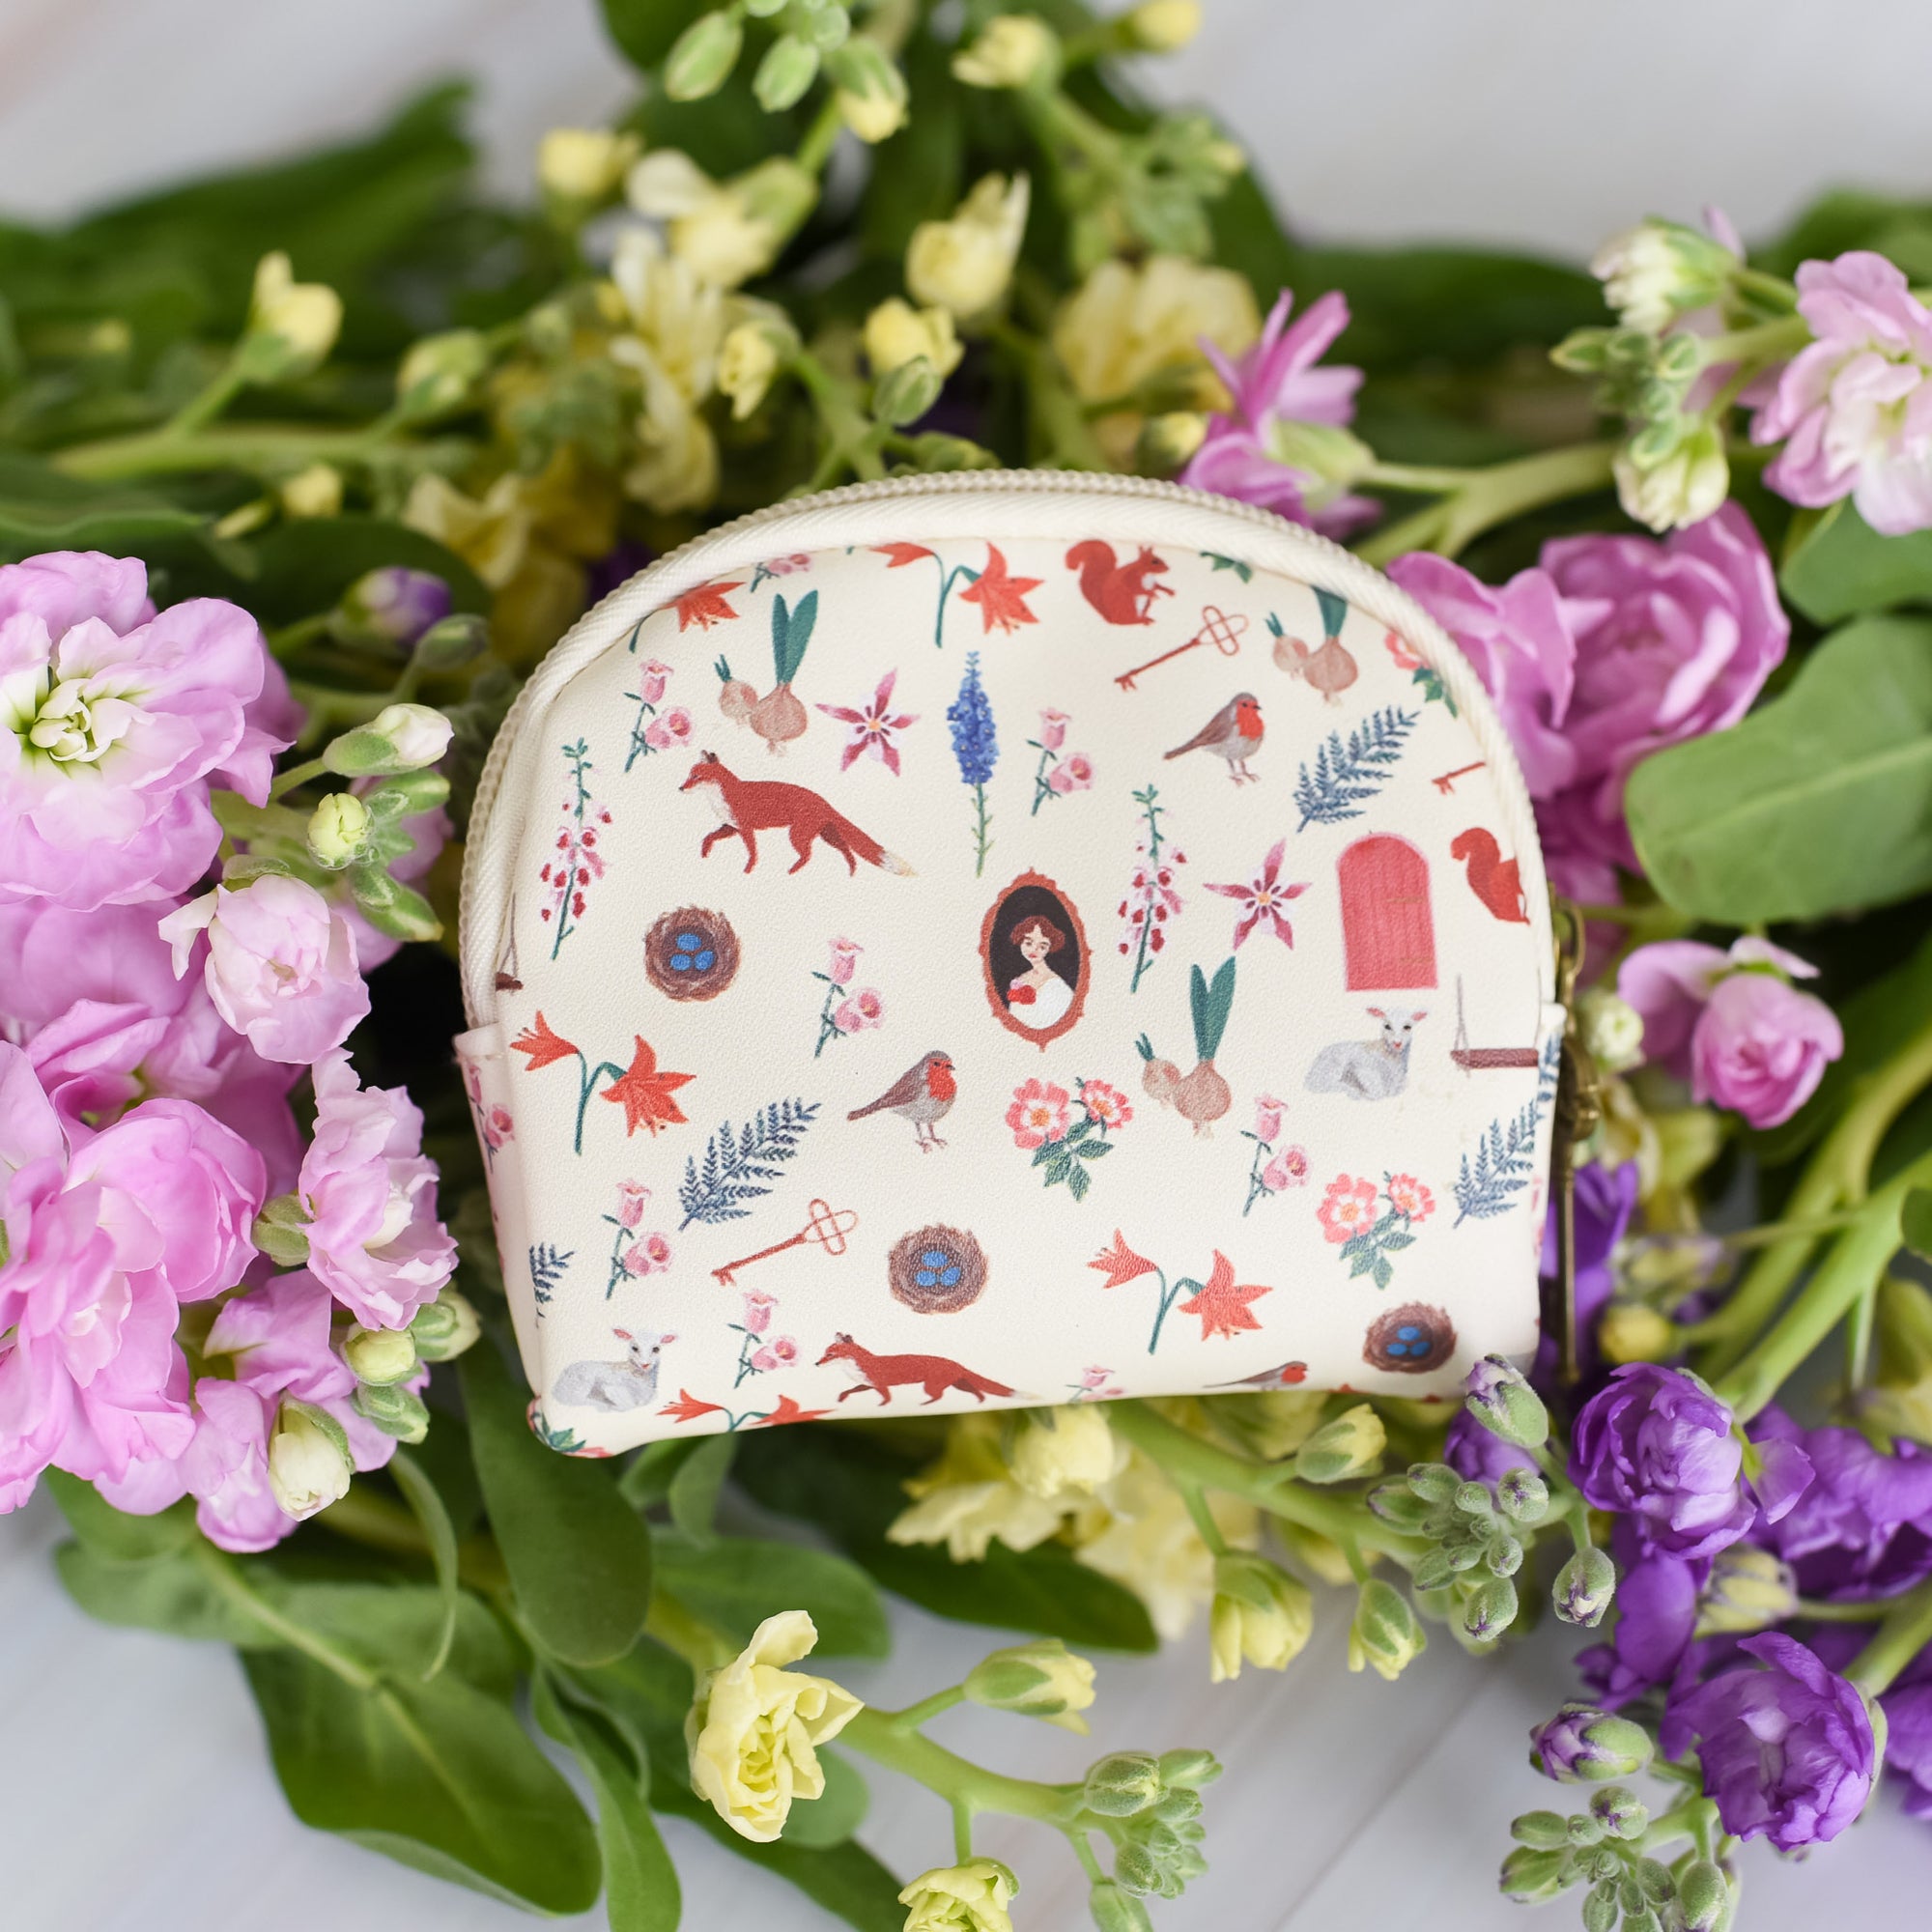 The Secret Garden Coin Pouch is white with a pattern that includes a robin, key, flowers, door, squirrel, fox, and nest.